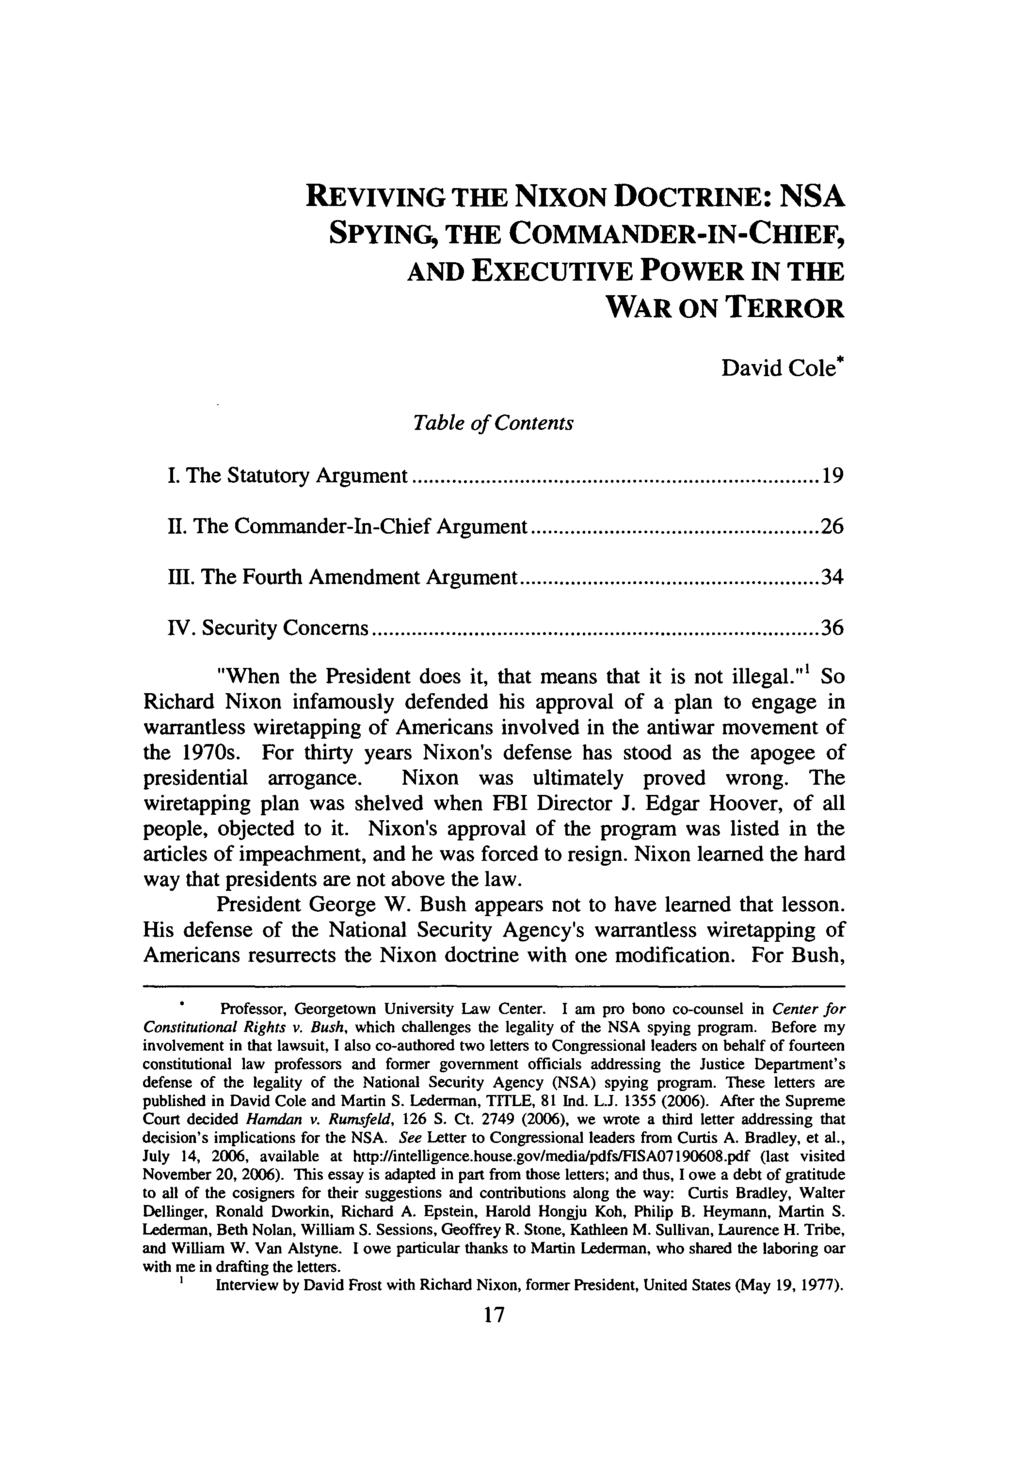 REVIVING THE NIXON DOCTRINE: NSA SPYING, THE COMMANDER-IN-CHIEF, AND EXECUTIVE POWER IN THE Table of Contents WAR ON TERROR David Cole* I. The Statutory Argument... 19 II.